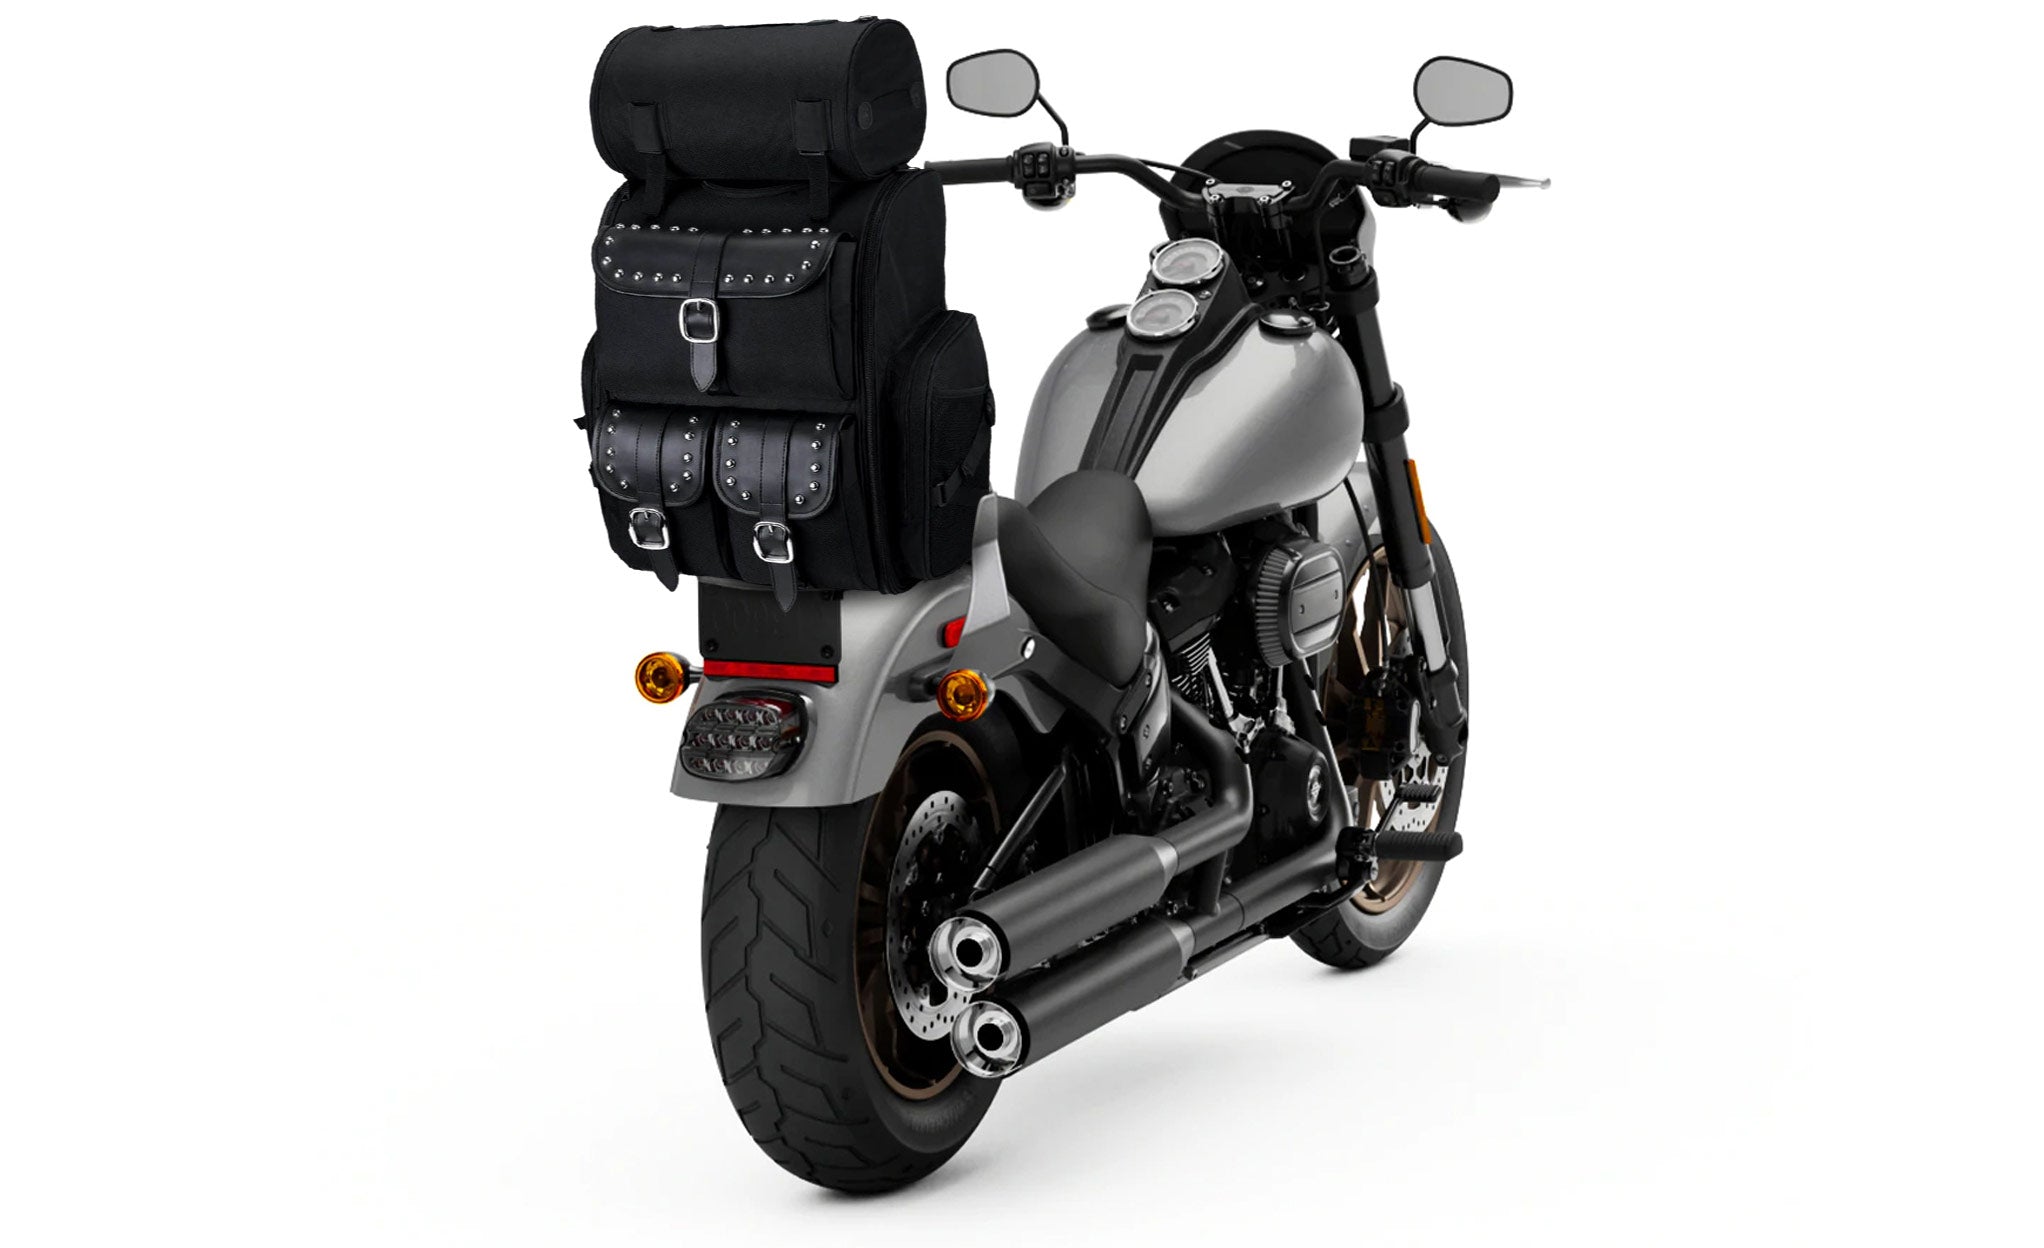 Viking Highway Extra Large Studded Triumph Motorcycle Tail Bag Bag on Bike View @expand